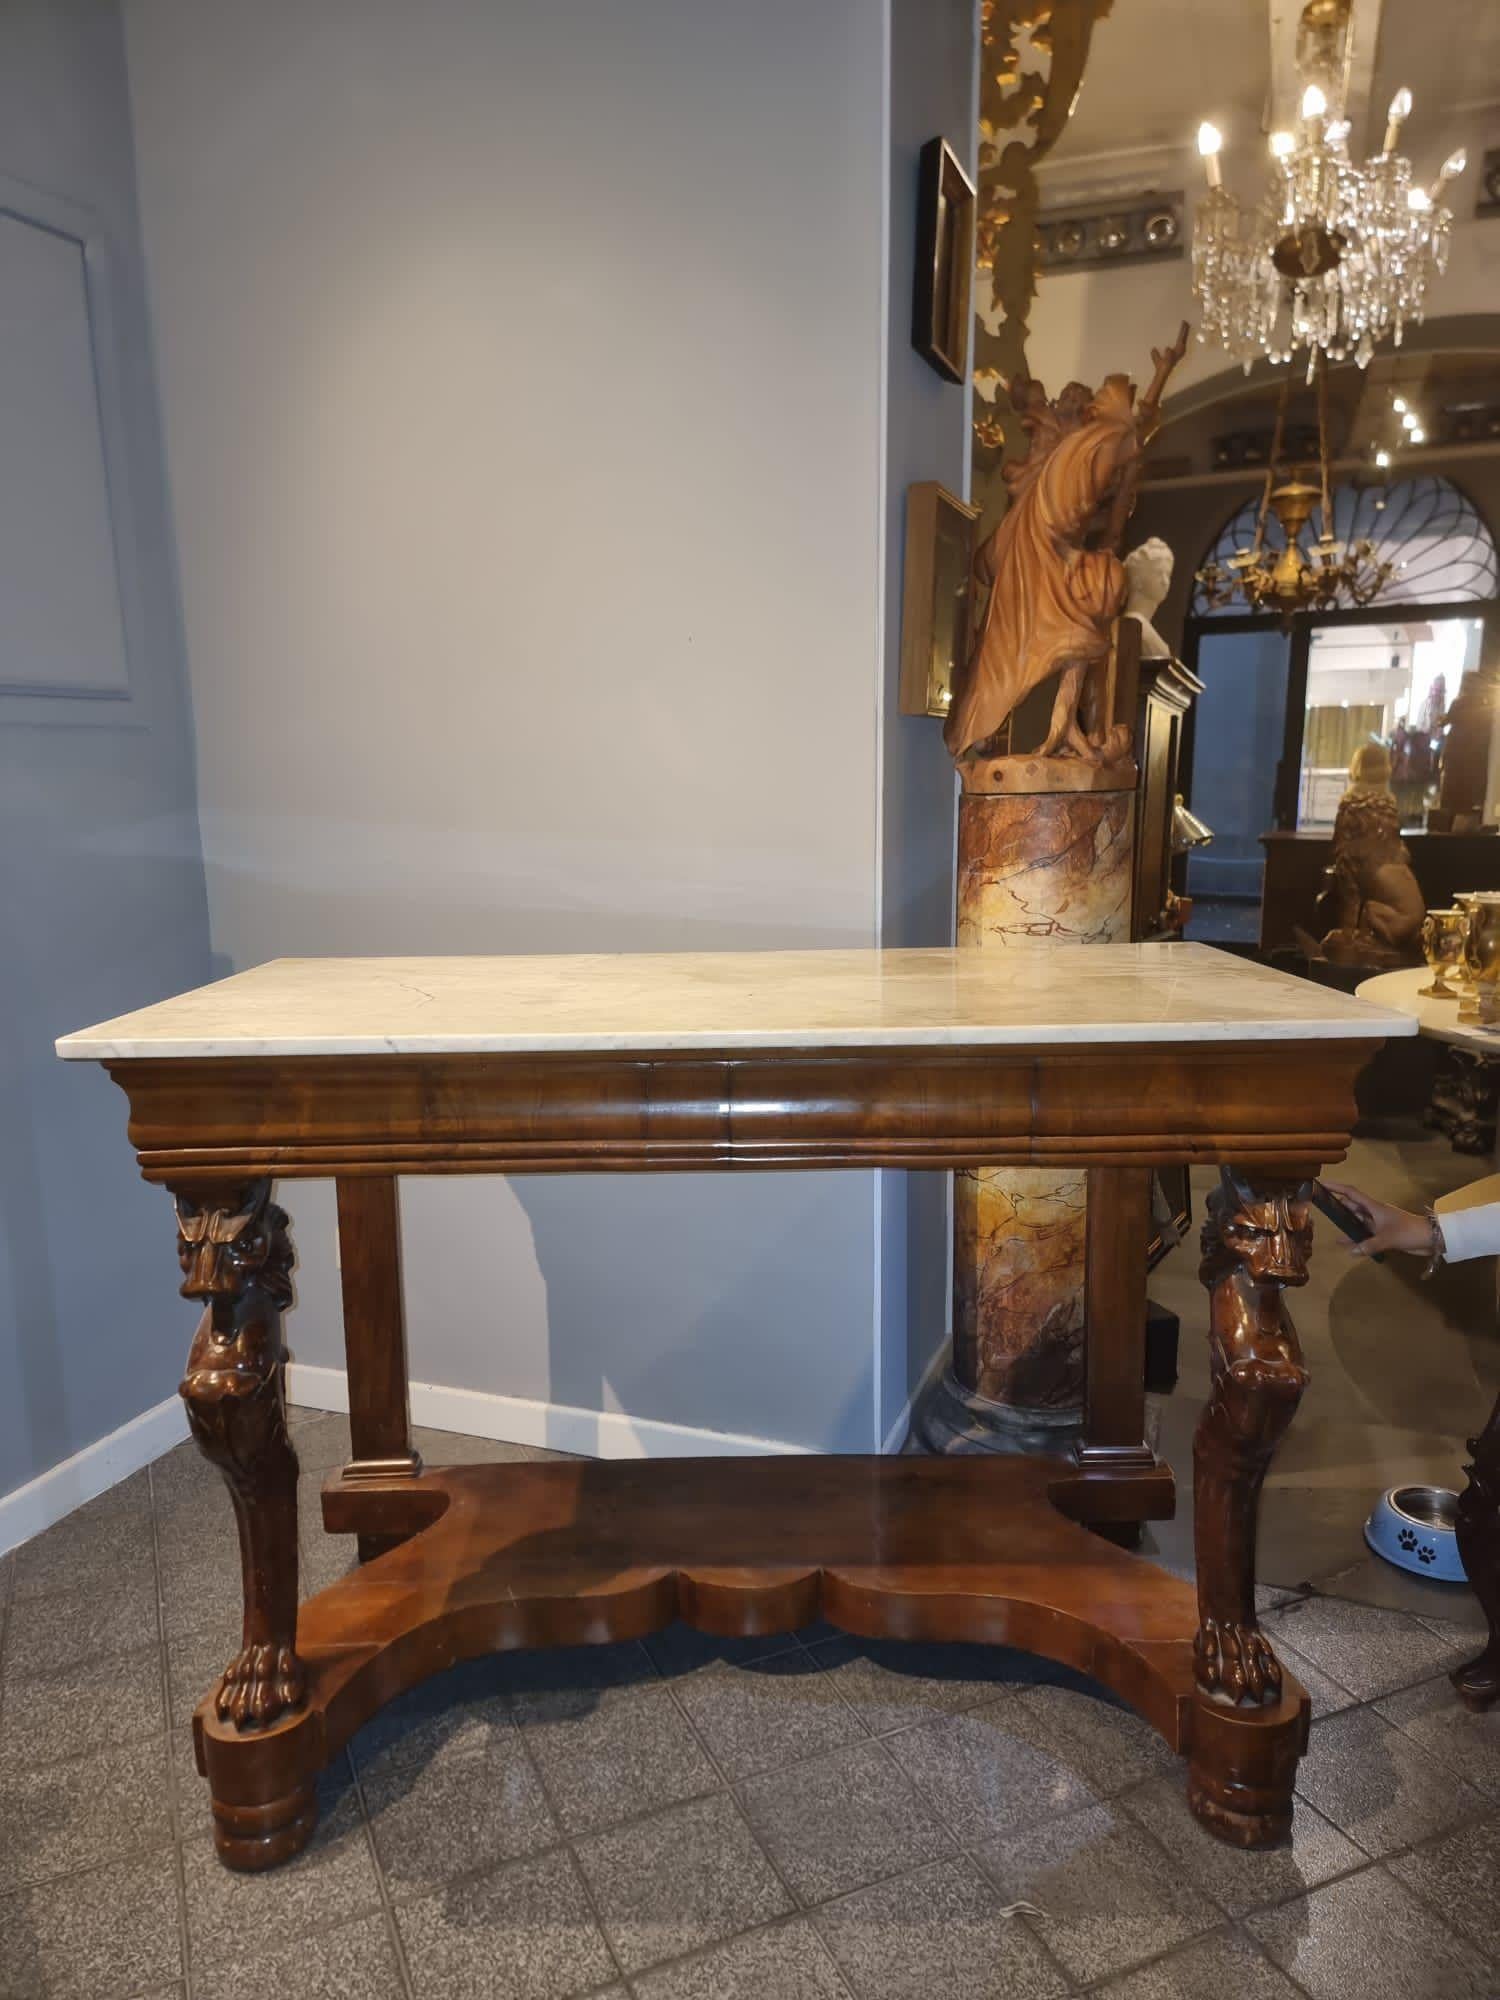 Beautiful pair of walnut consoles with pillars depicting feral figures, marble tops, mid-18th century.

Walnut wood is a valuable wood known for its beauty and durability. It is often chosen for the creation of high-quality period furniture.

The